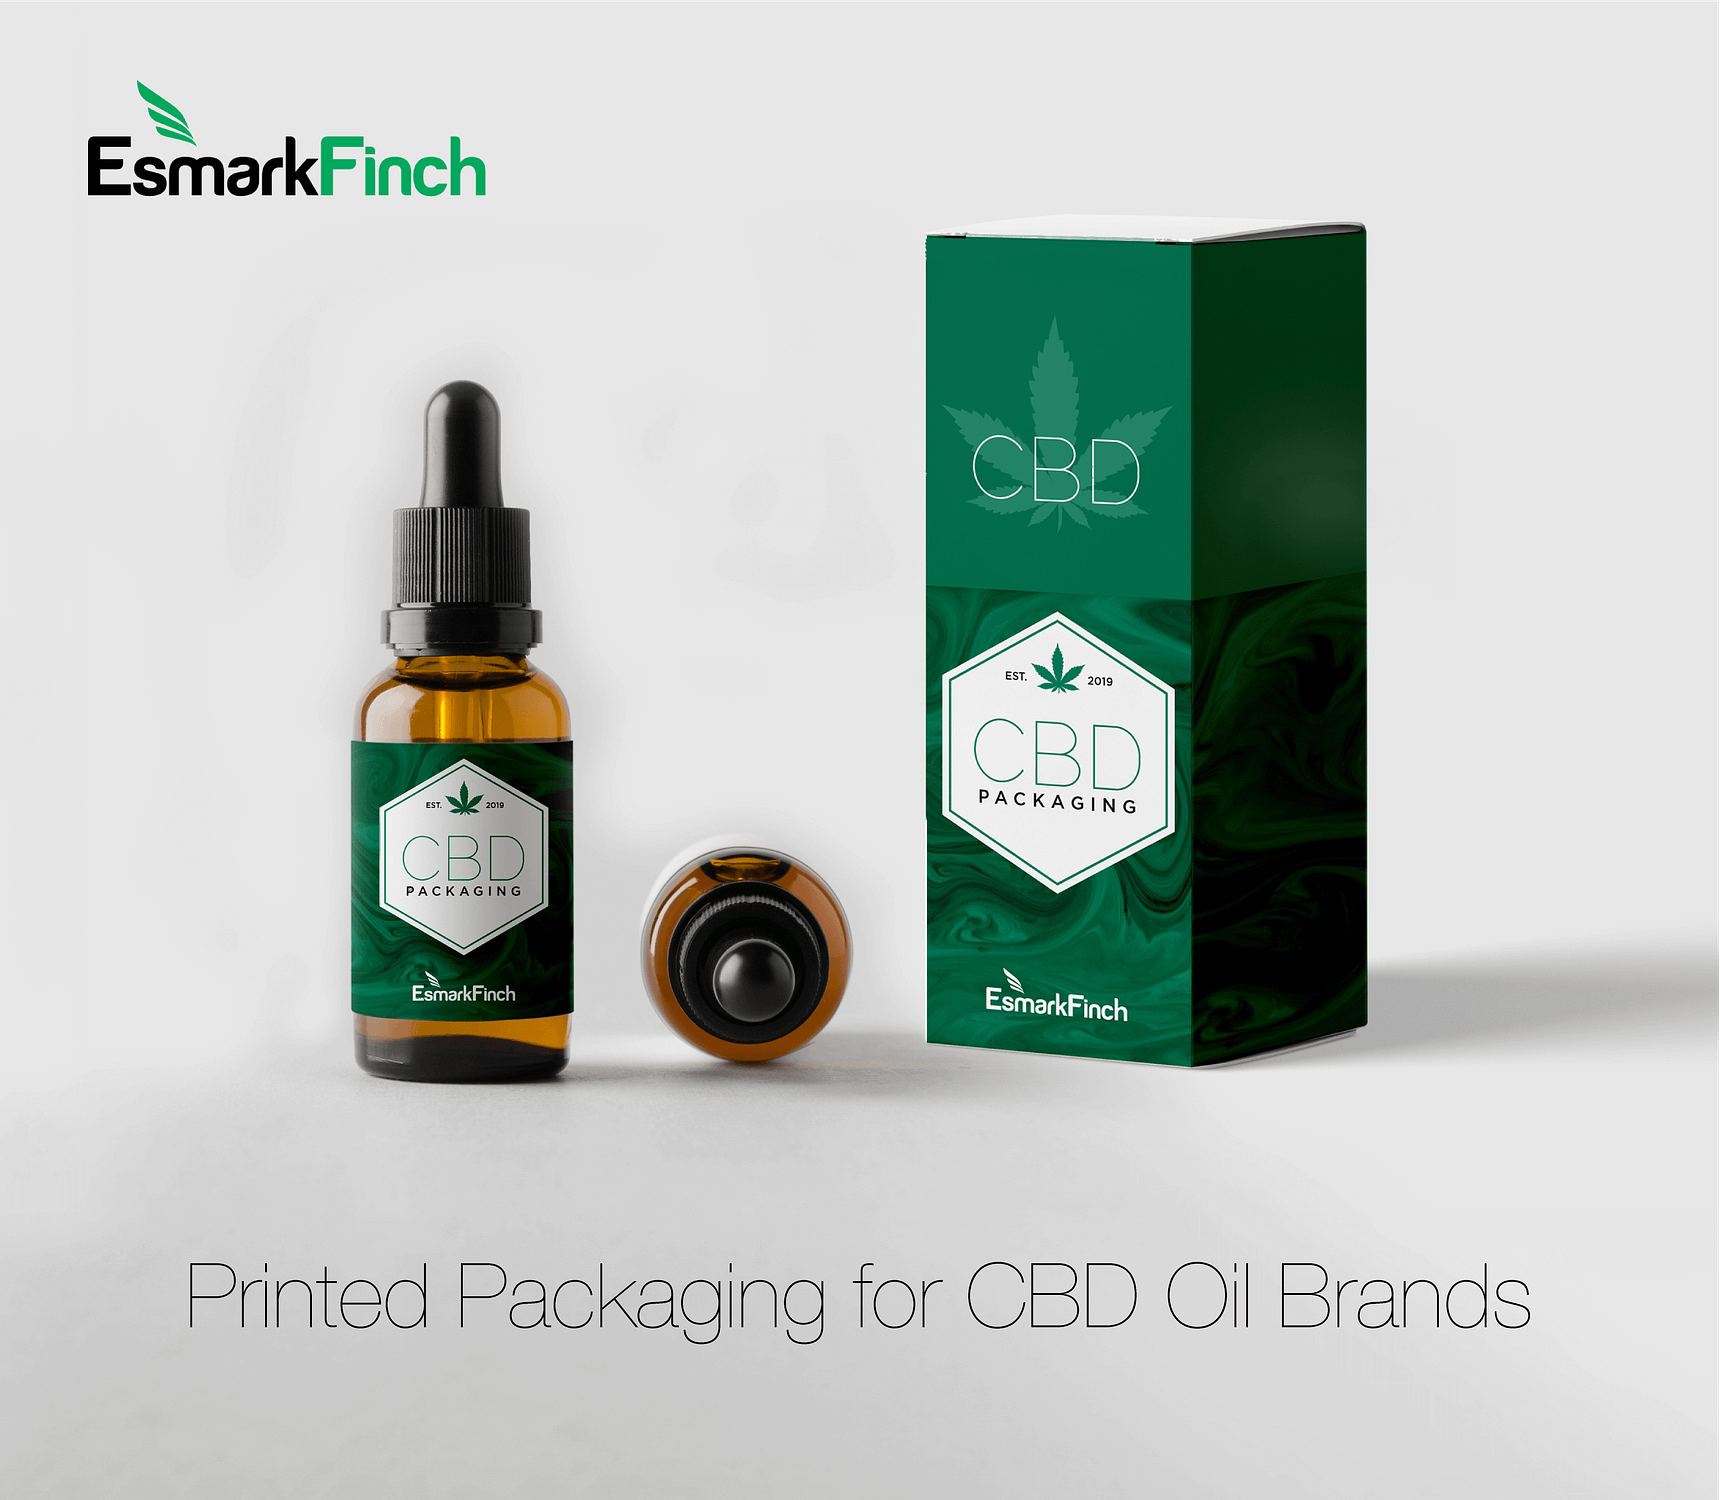 Esmark Finch specialise in printed packaging for CBD Brands